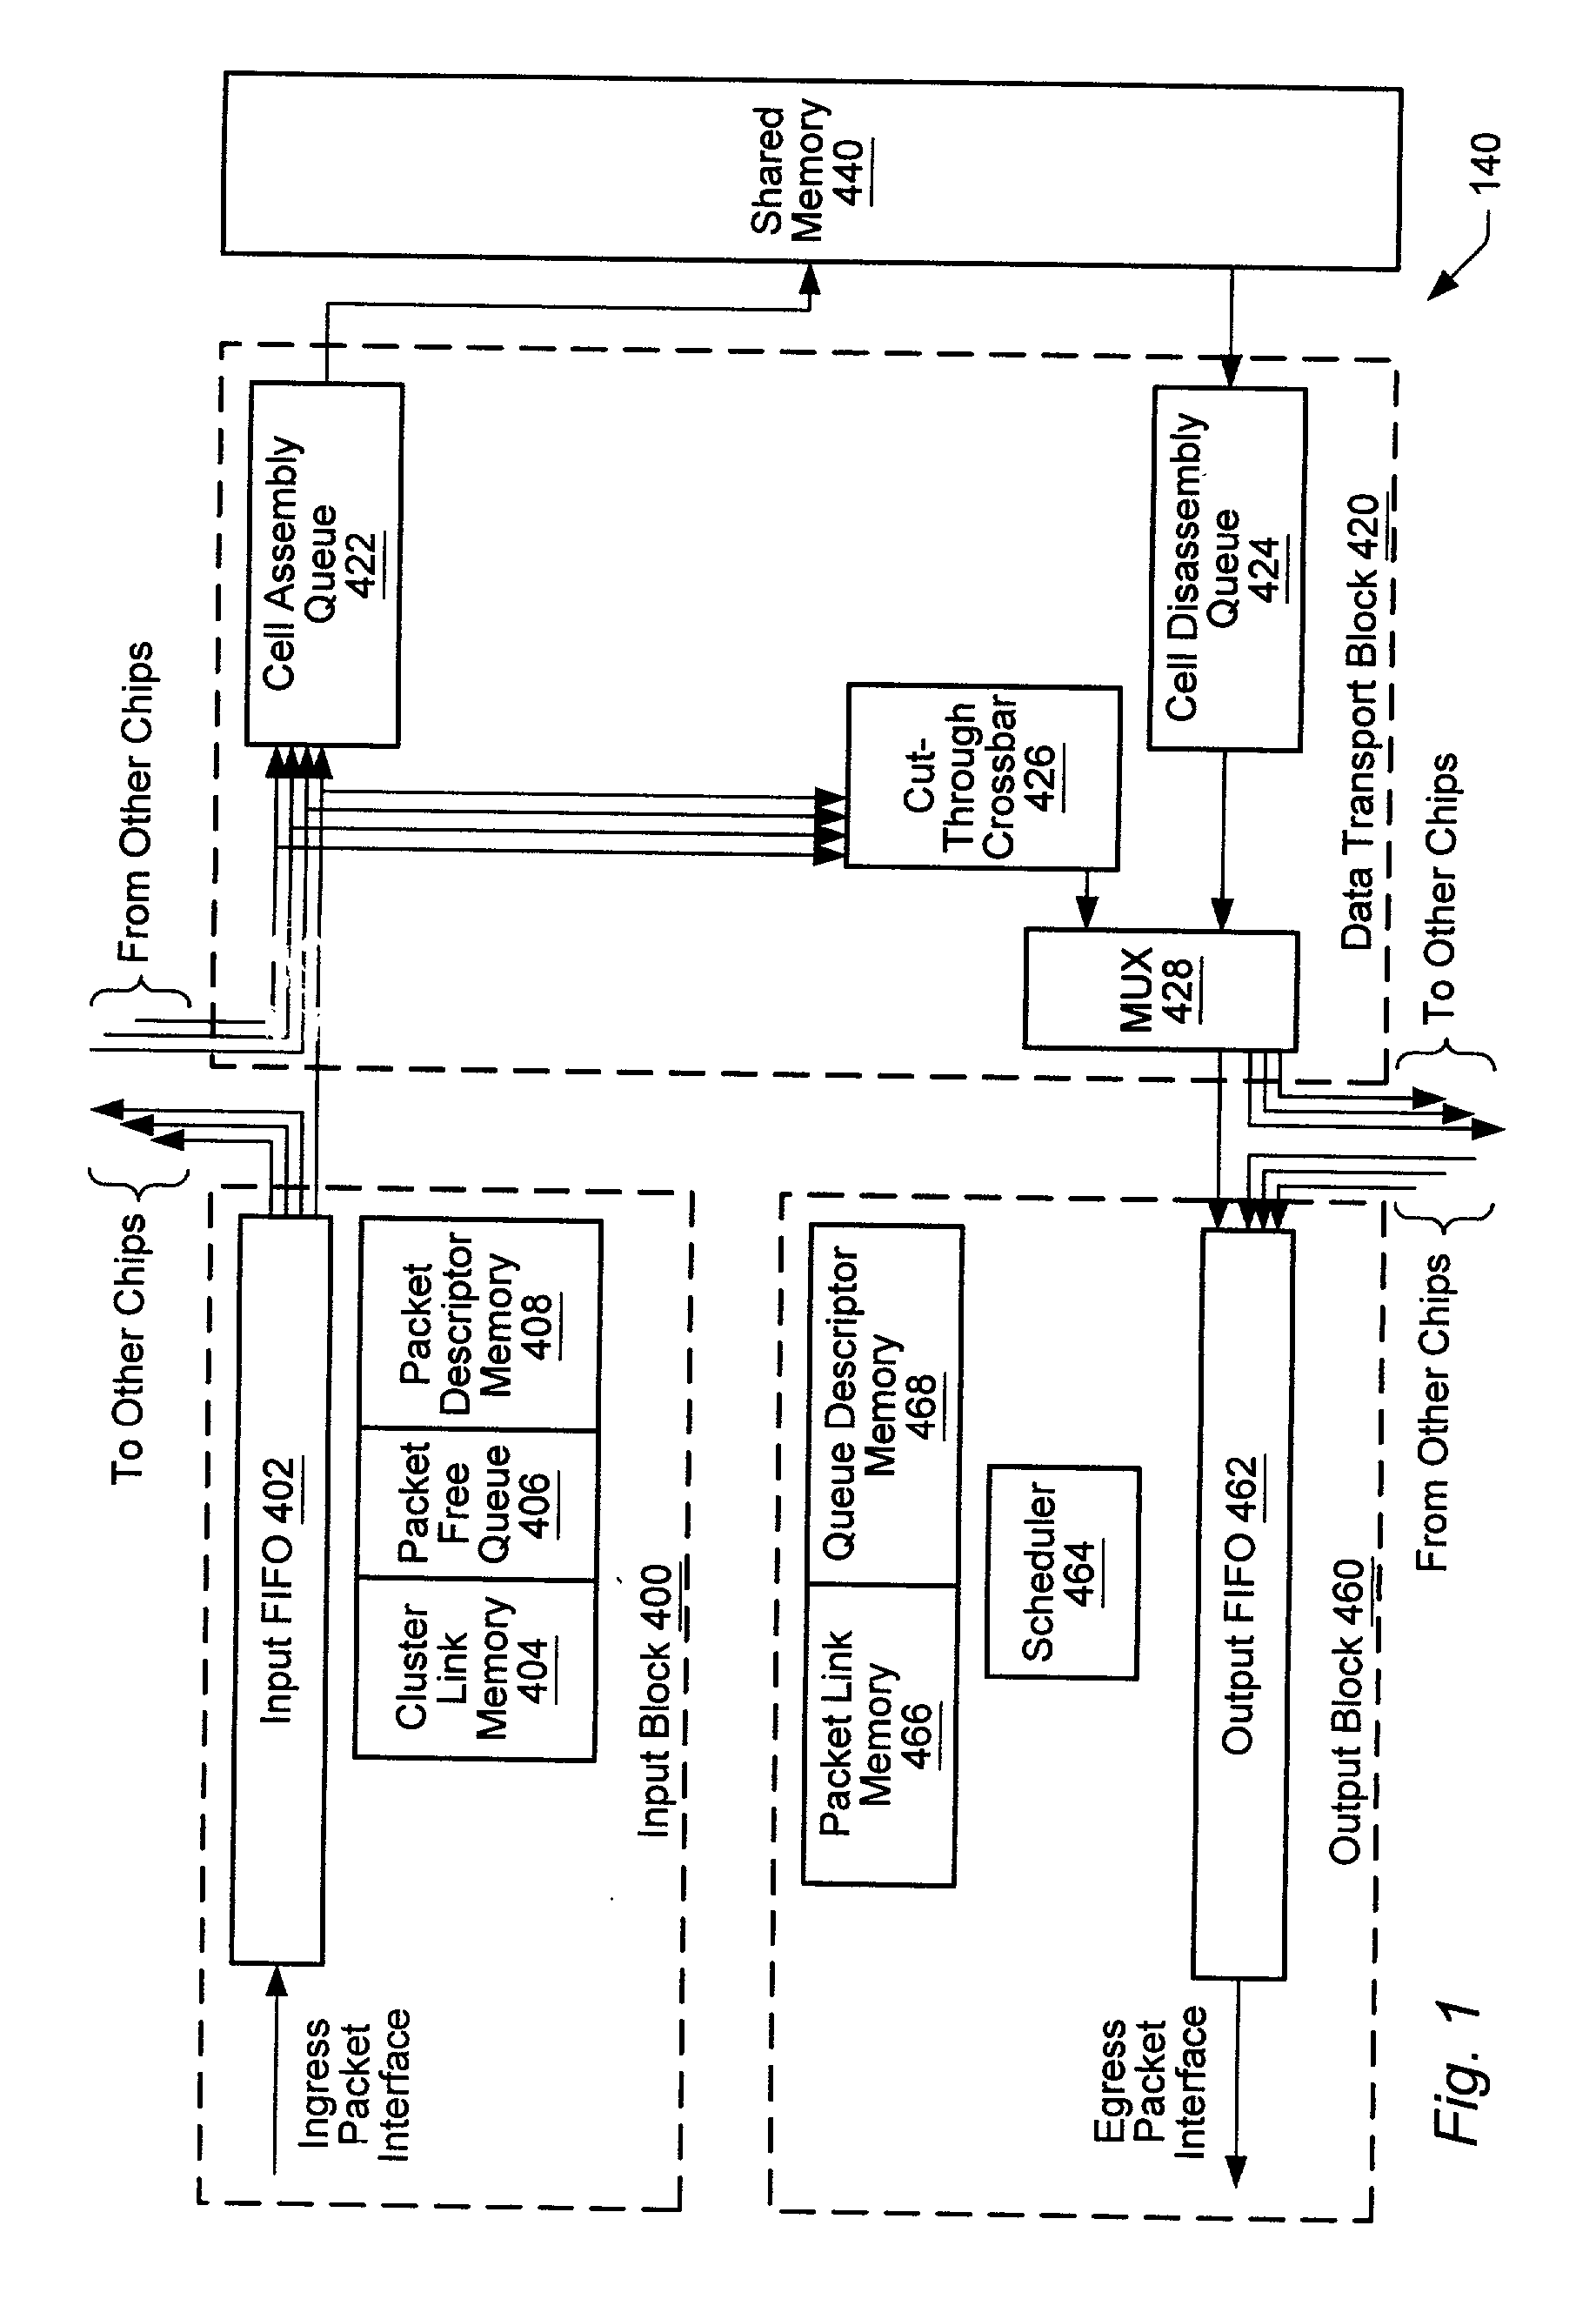 Virtual channels in a network switch